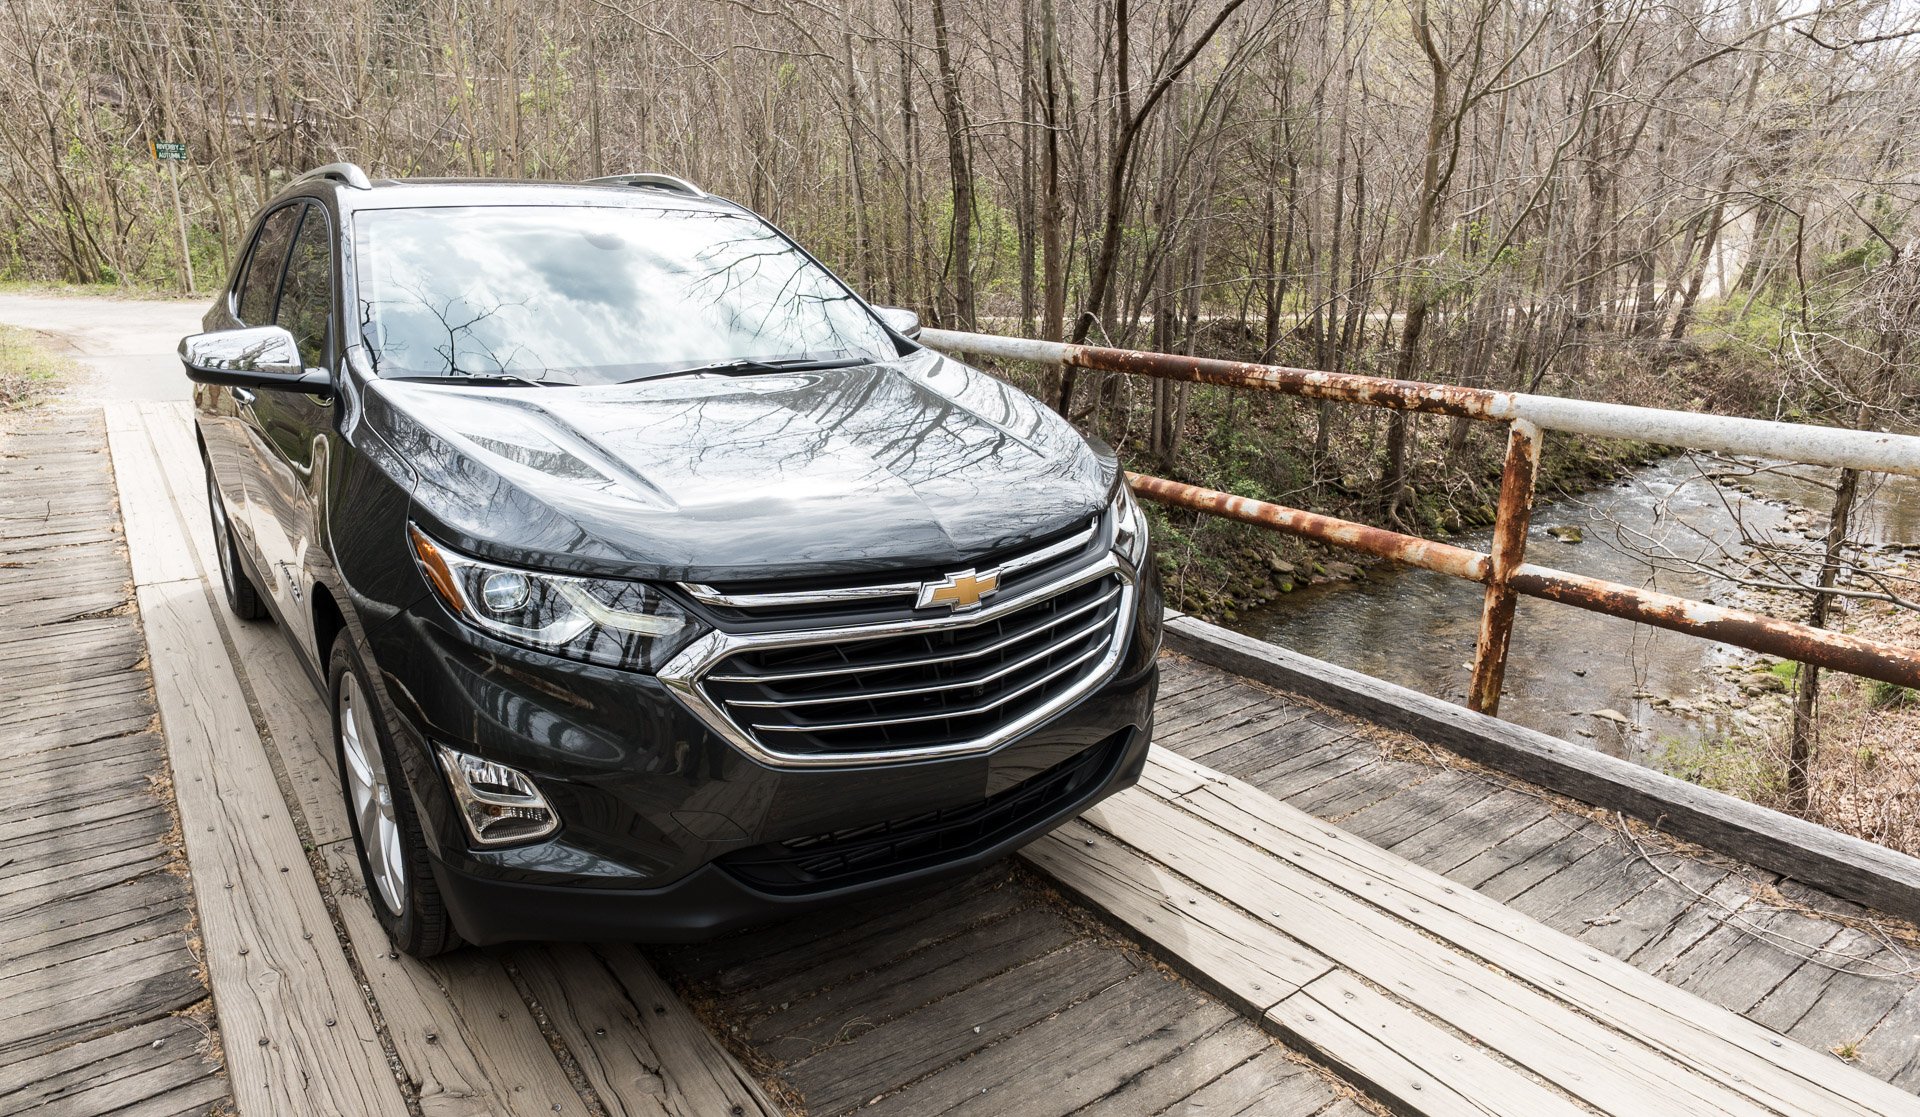 A Southern Roadtrip in the 2018 Chevrolet Equinox